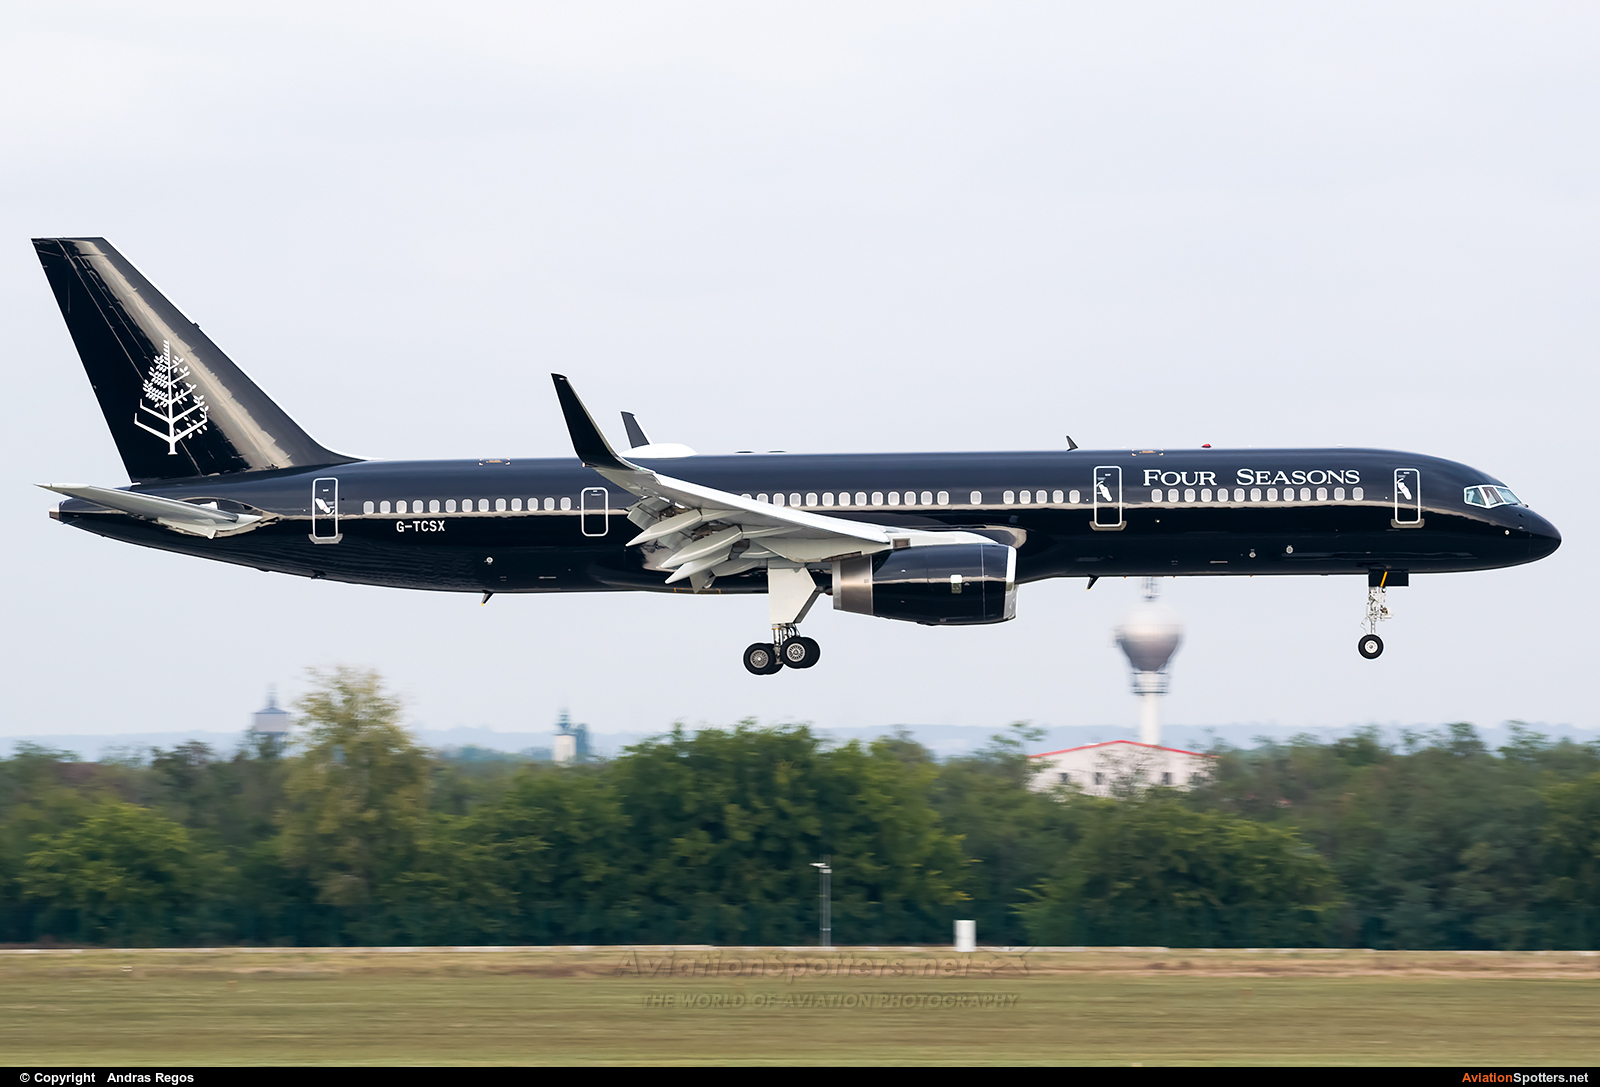 Private  -  757-200  (G-TCSX) By Andras Regos (regos)